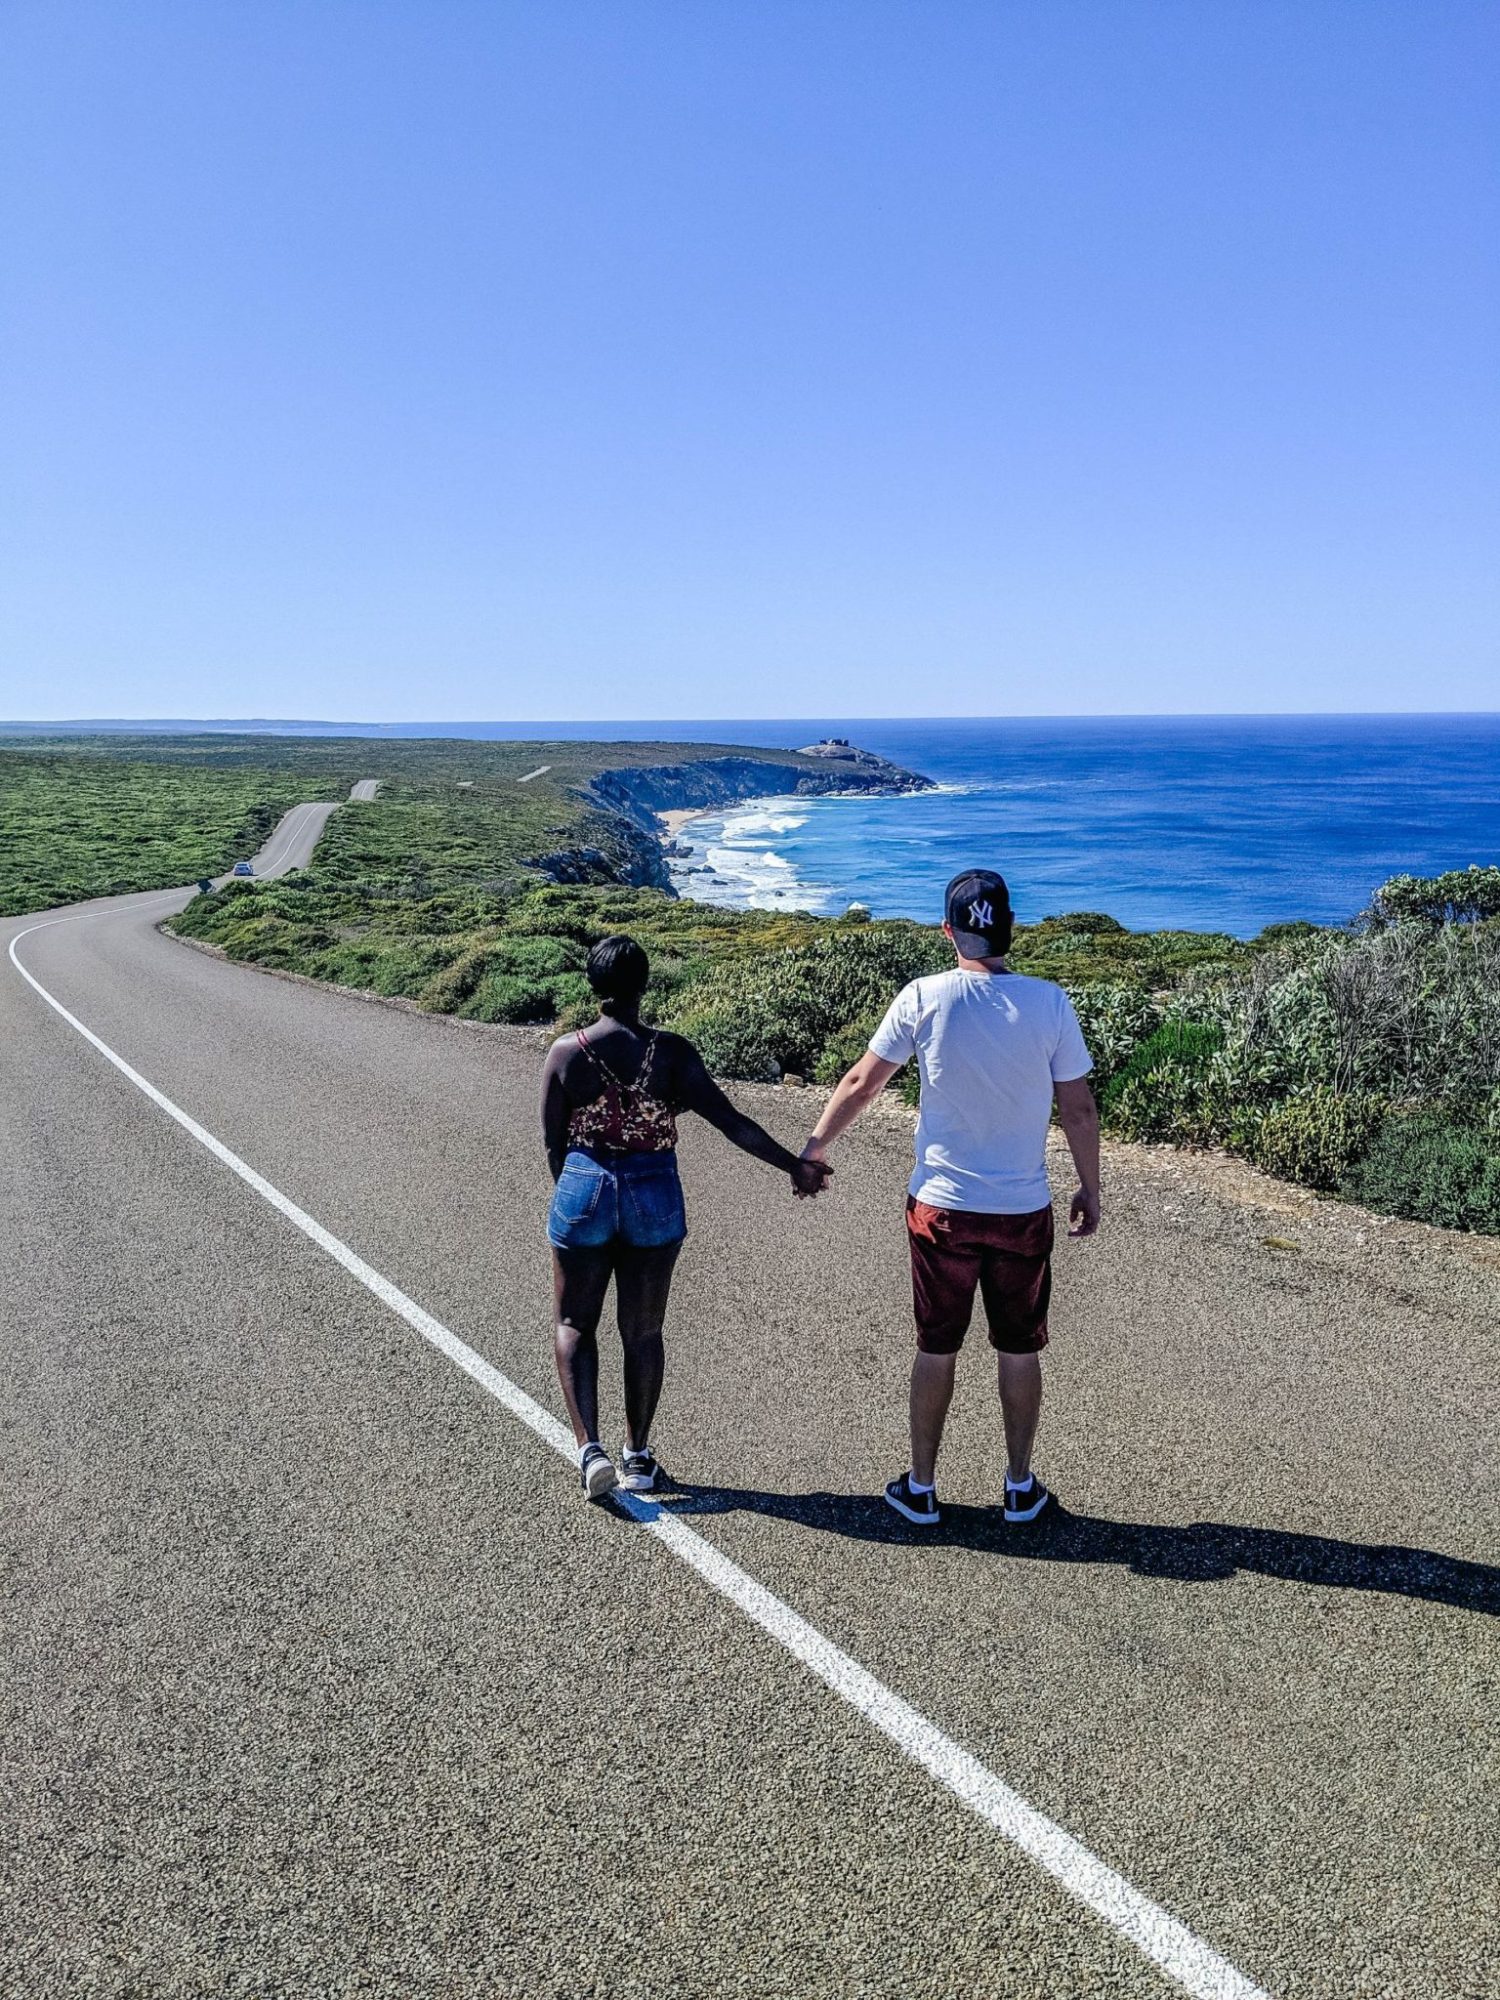 Yann and I on the road to the remarkable rocks on Kangaroo Island